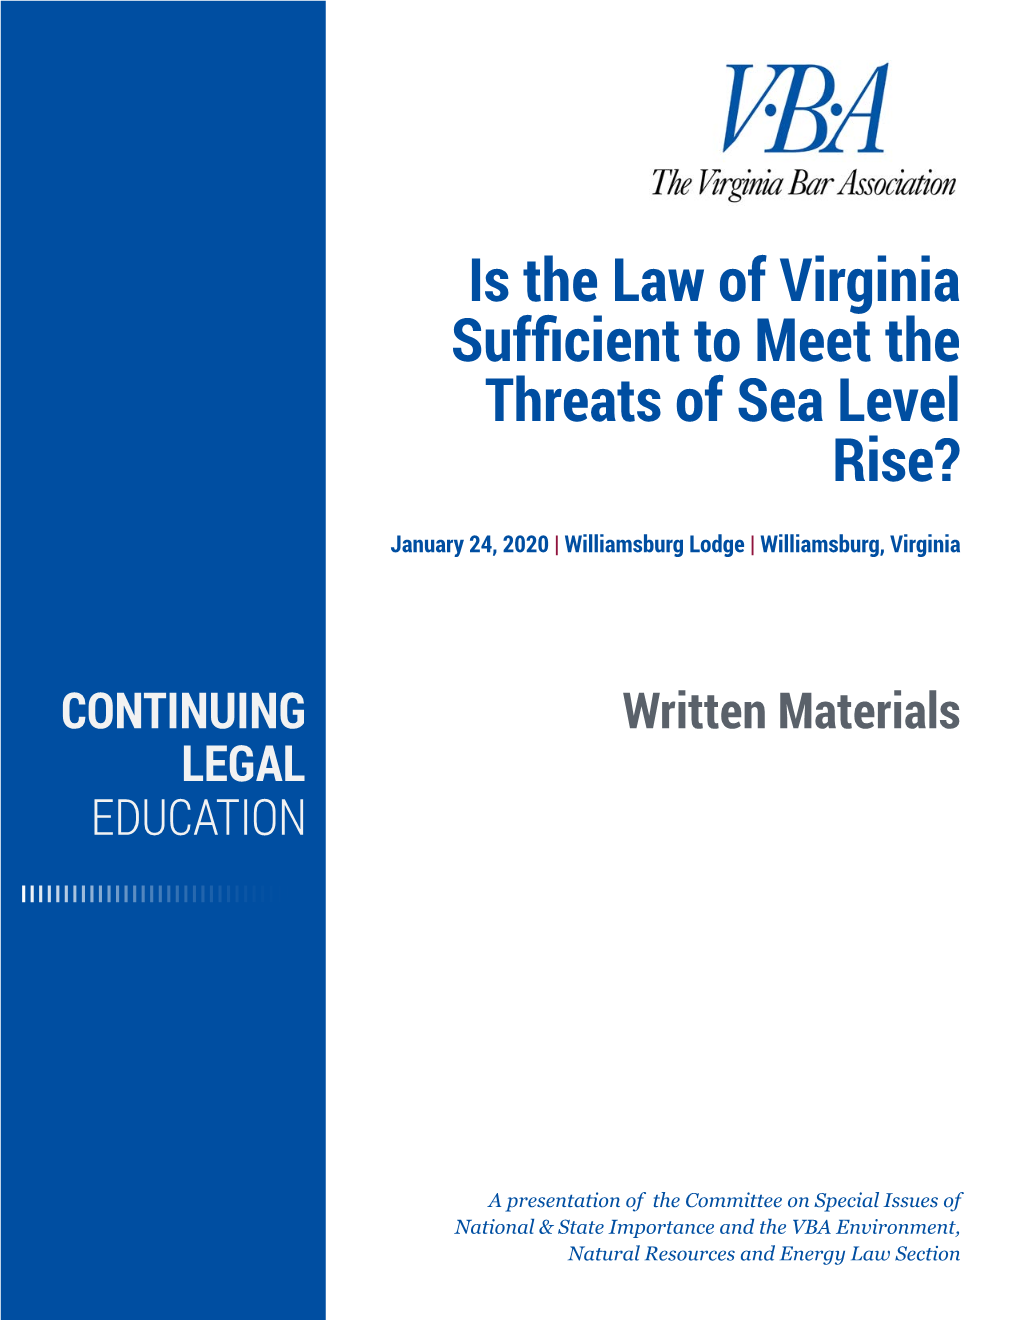 Is the Law of Virginia Sufficient to Meet the Threats of Sea Level Rise?